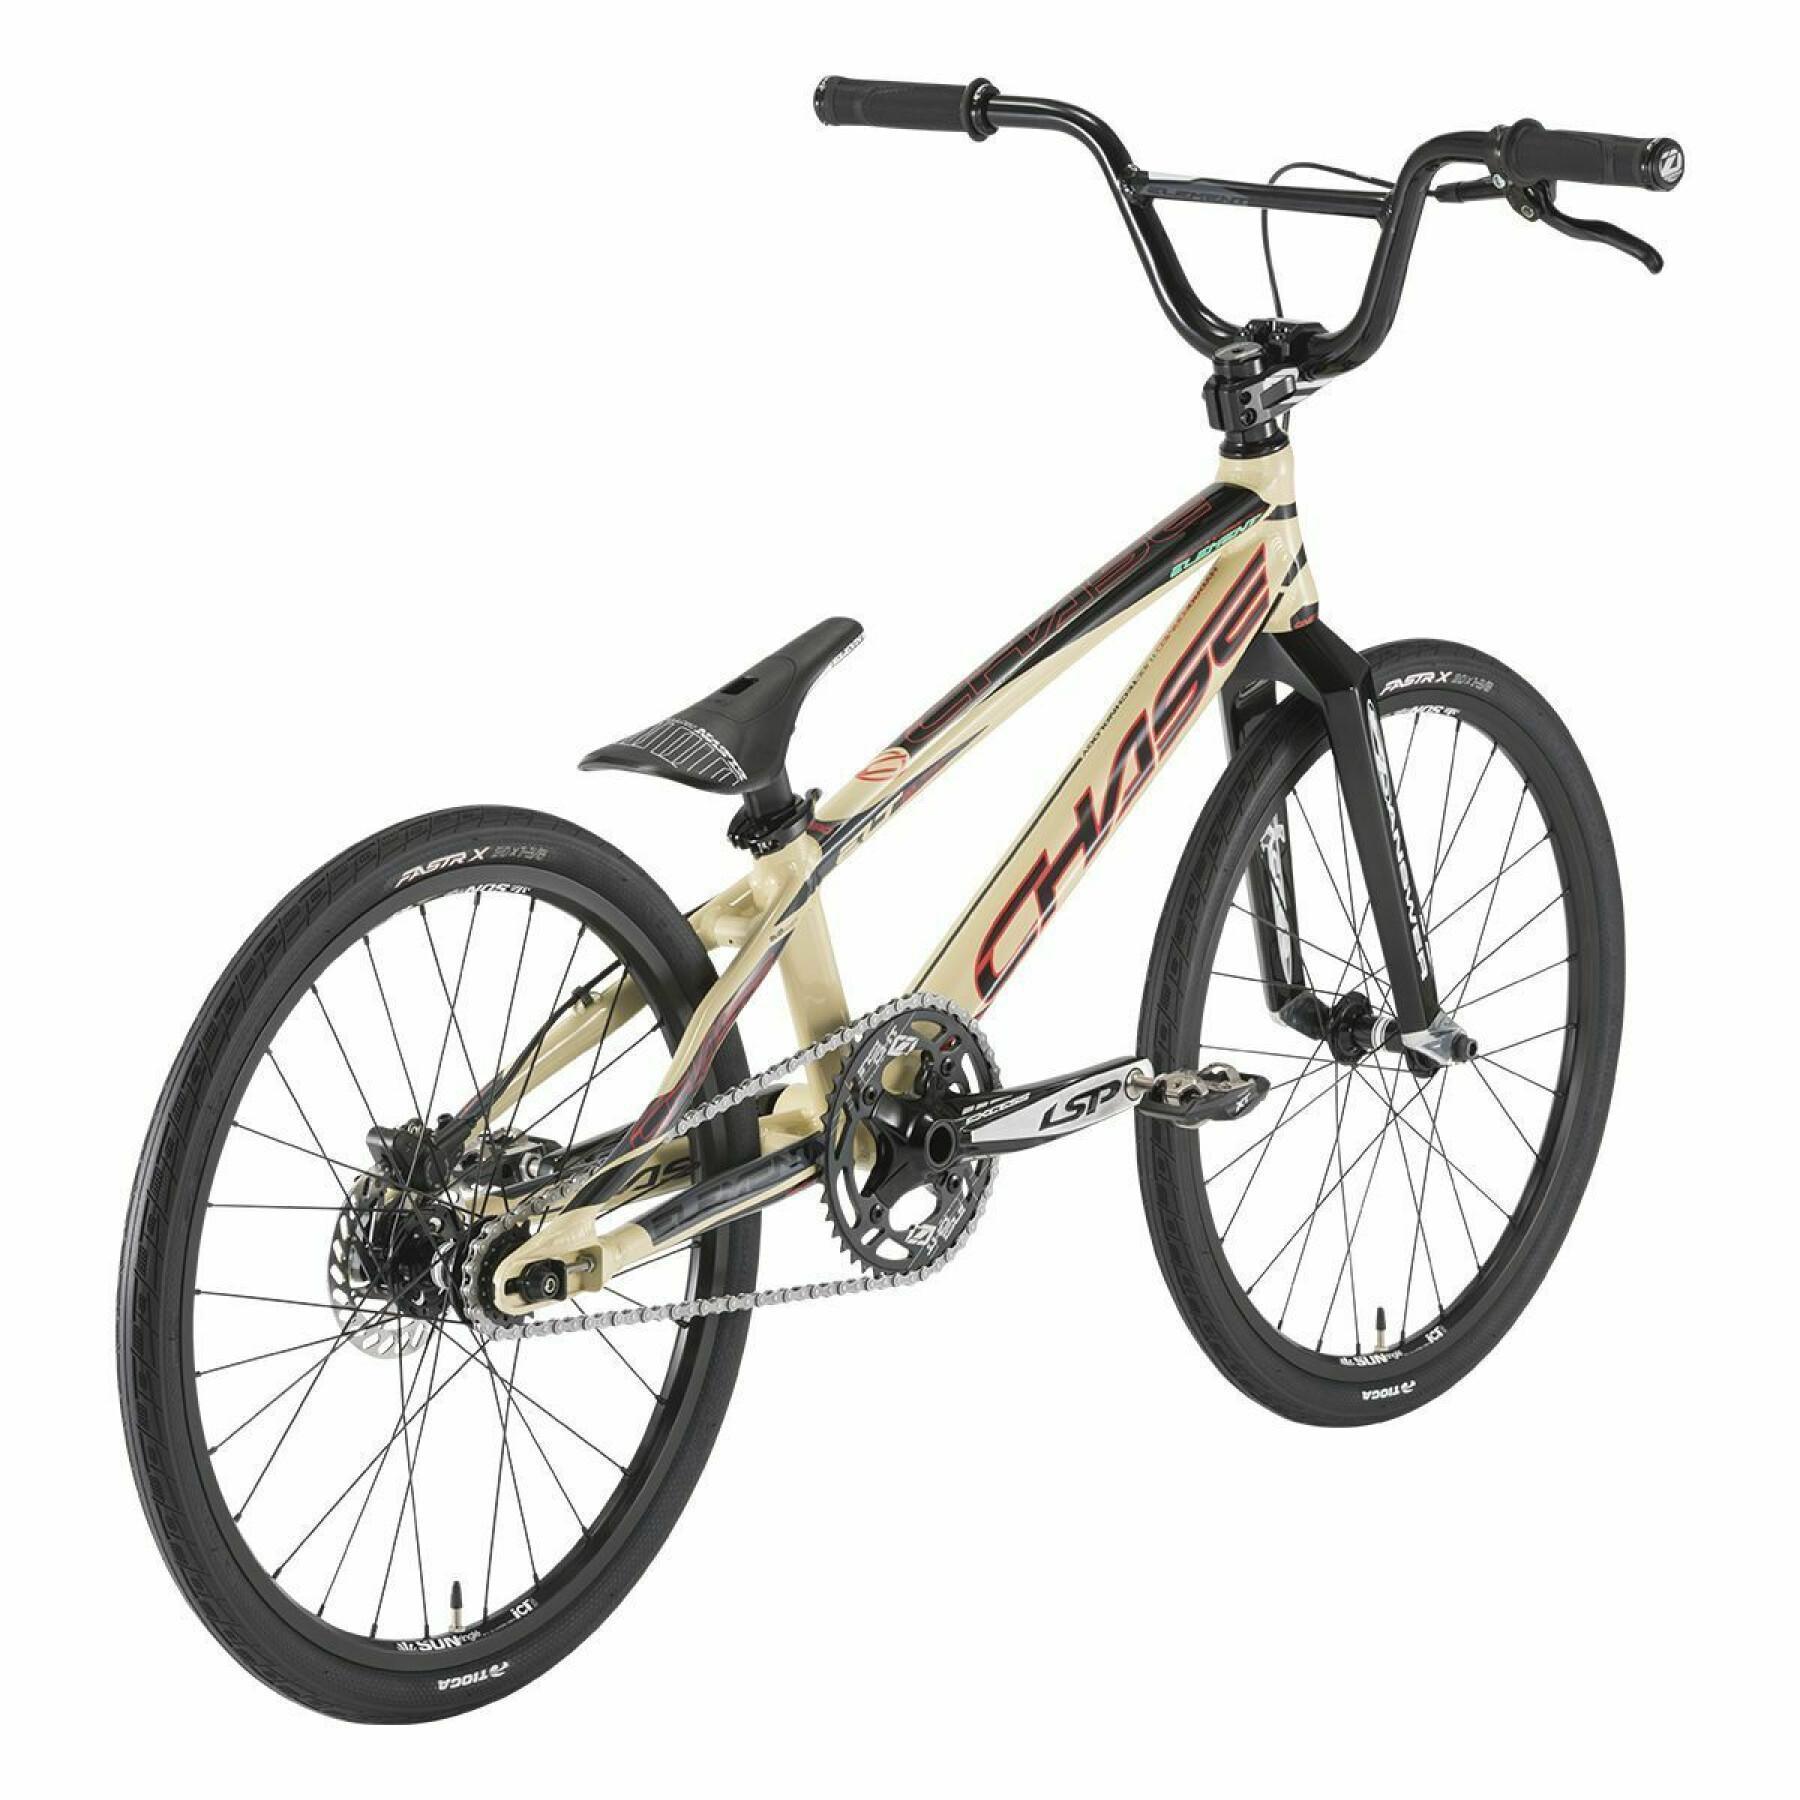 Bicicletta per bambini Chase element 2021 Expert